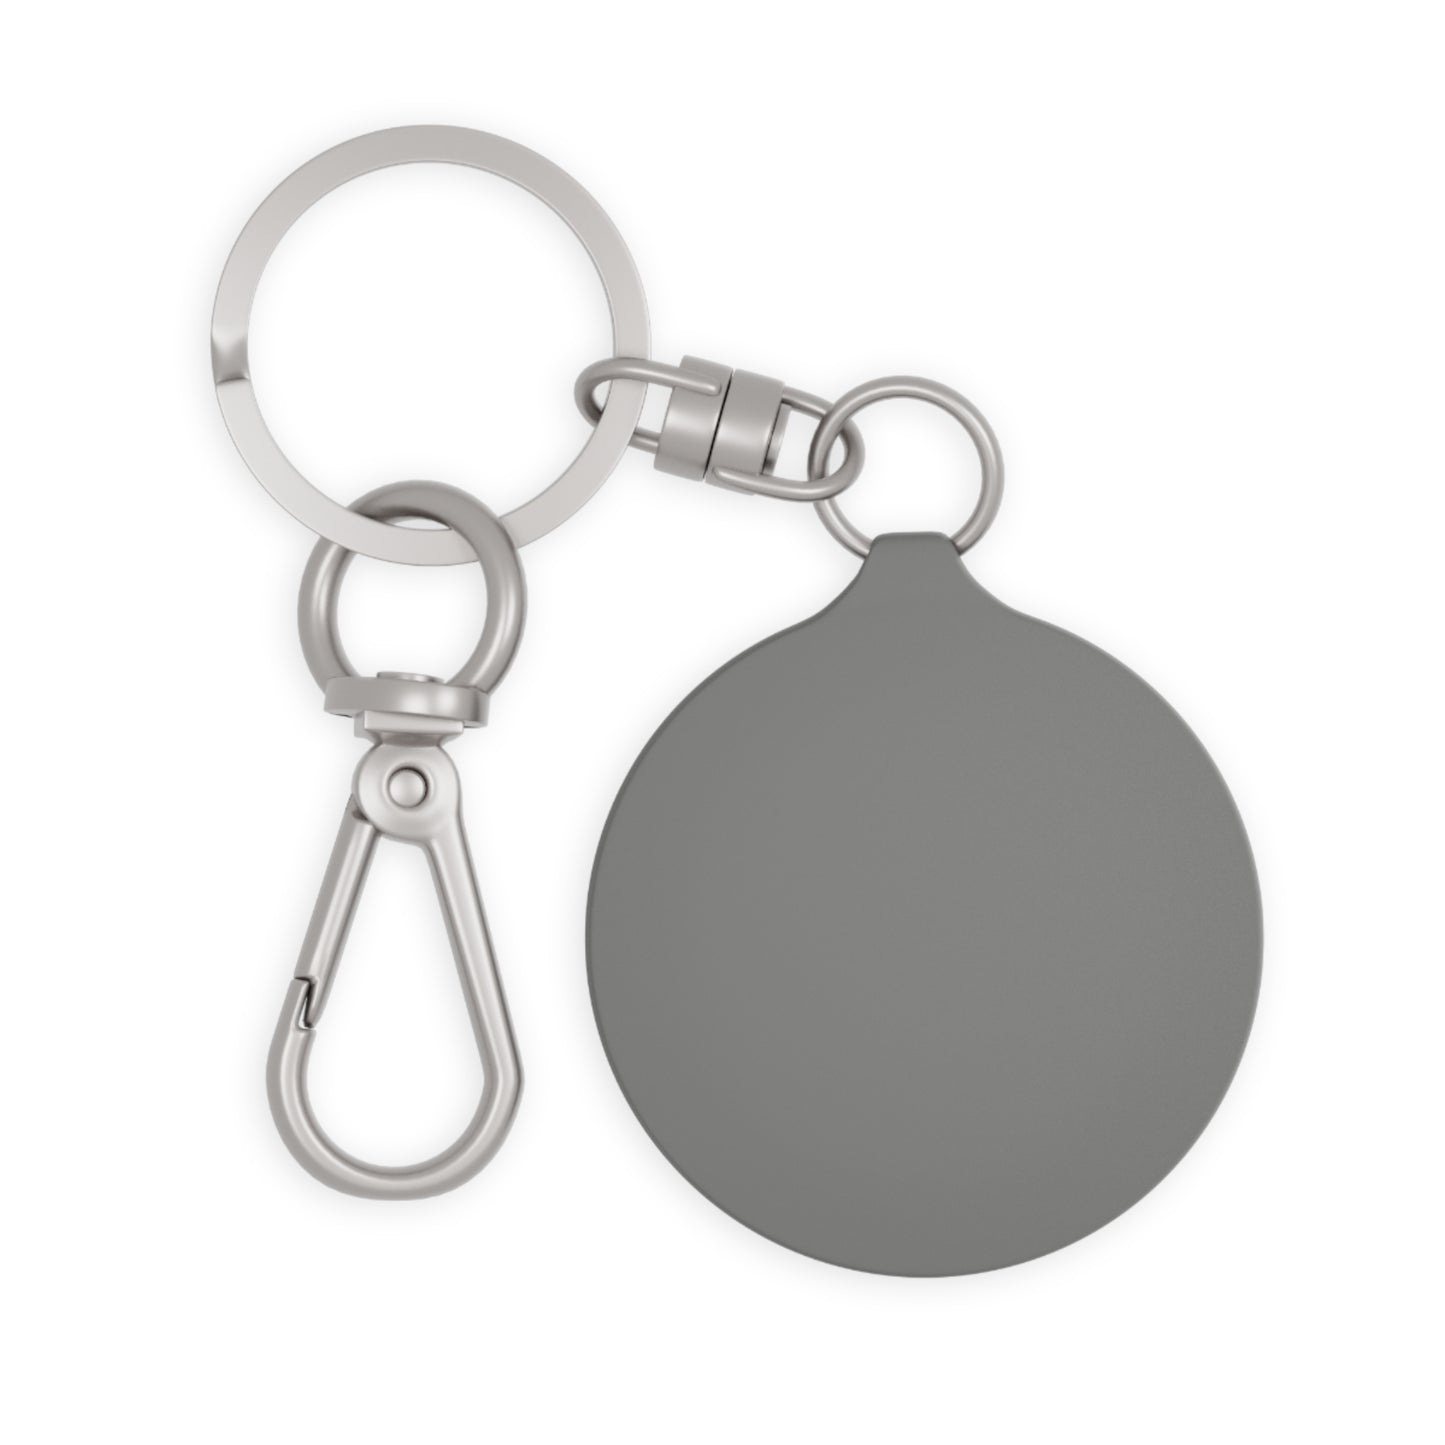 A 3D rendering of a Make It Happen Cannabis Keyring Tag with a circular blank tag attached, isolated on a white background.